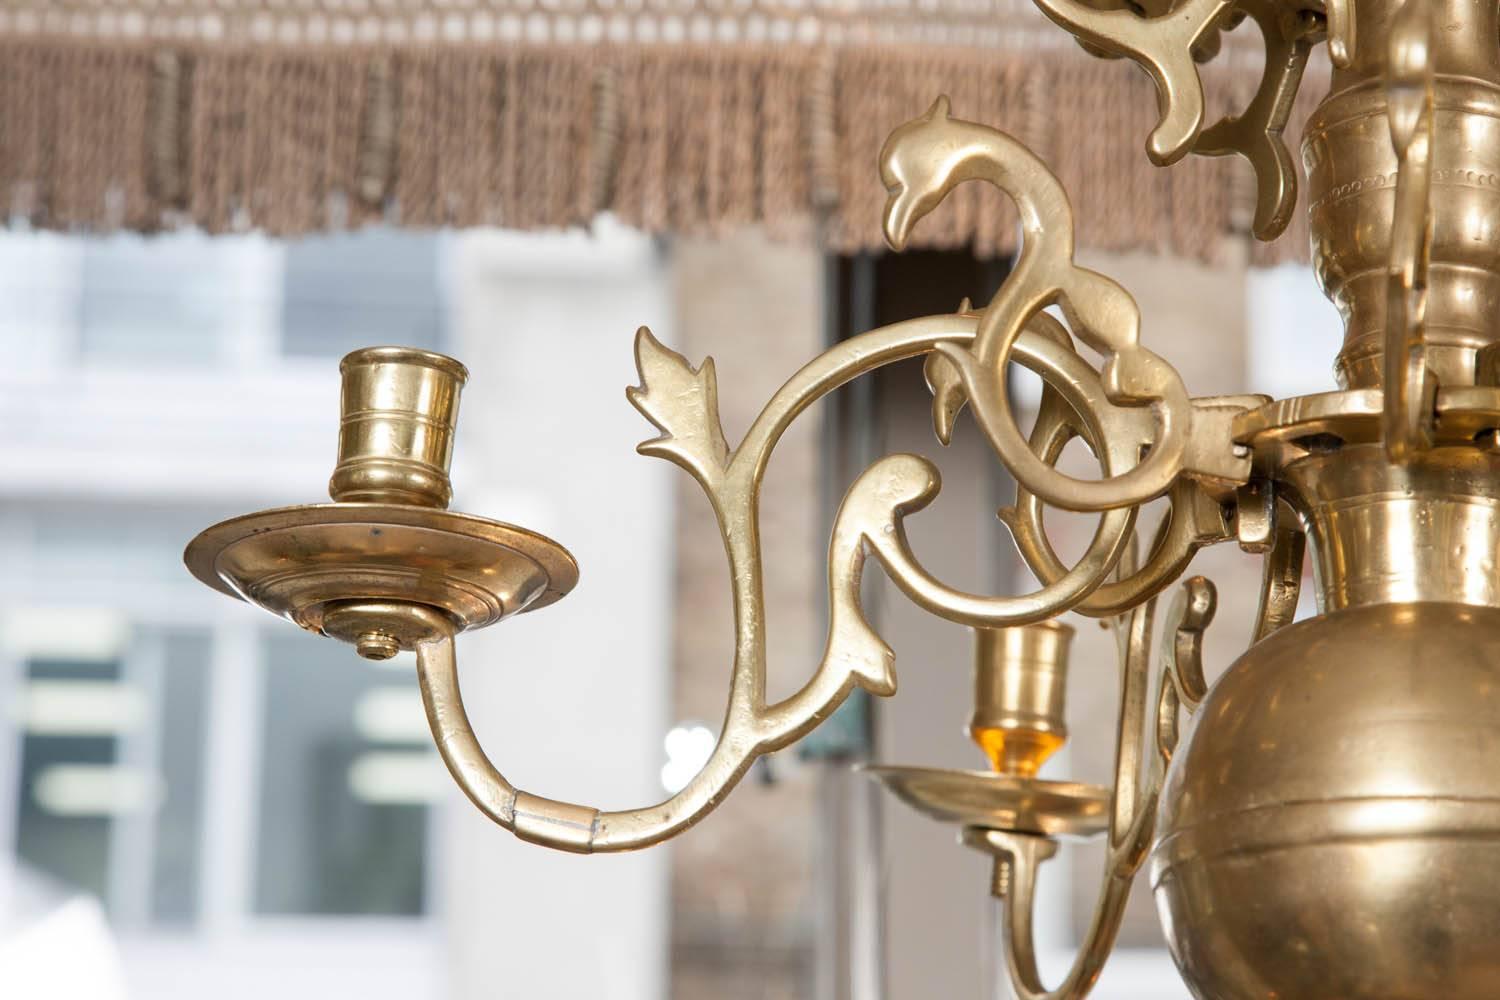 An alluring Anglo-Dutch period brass chandelier dating from the second half of the 17th century. The chandelier has a tier of reflector rosettes to disperse the candle light better. There are old restoration braces to some of the arms.